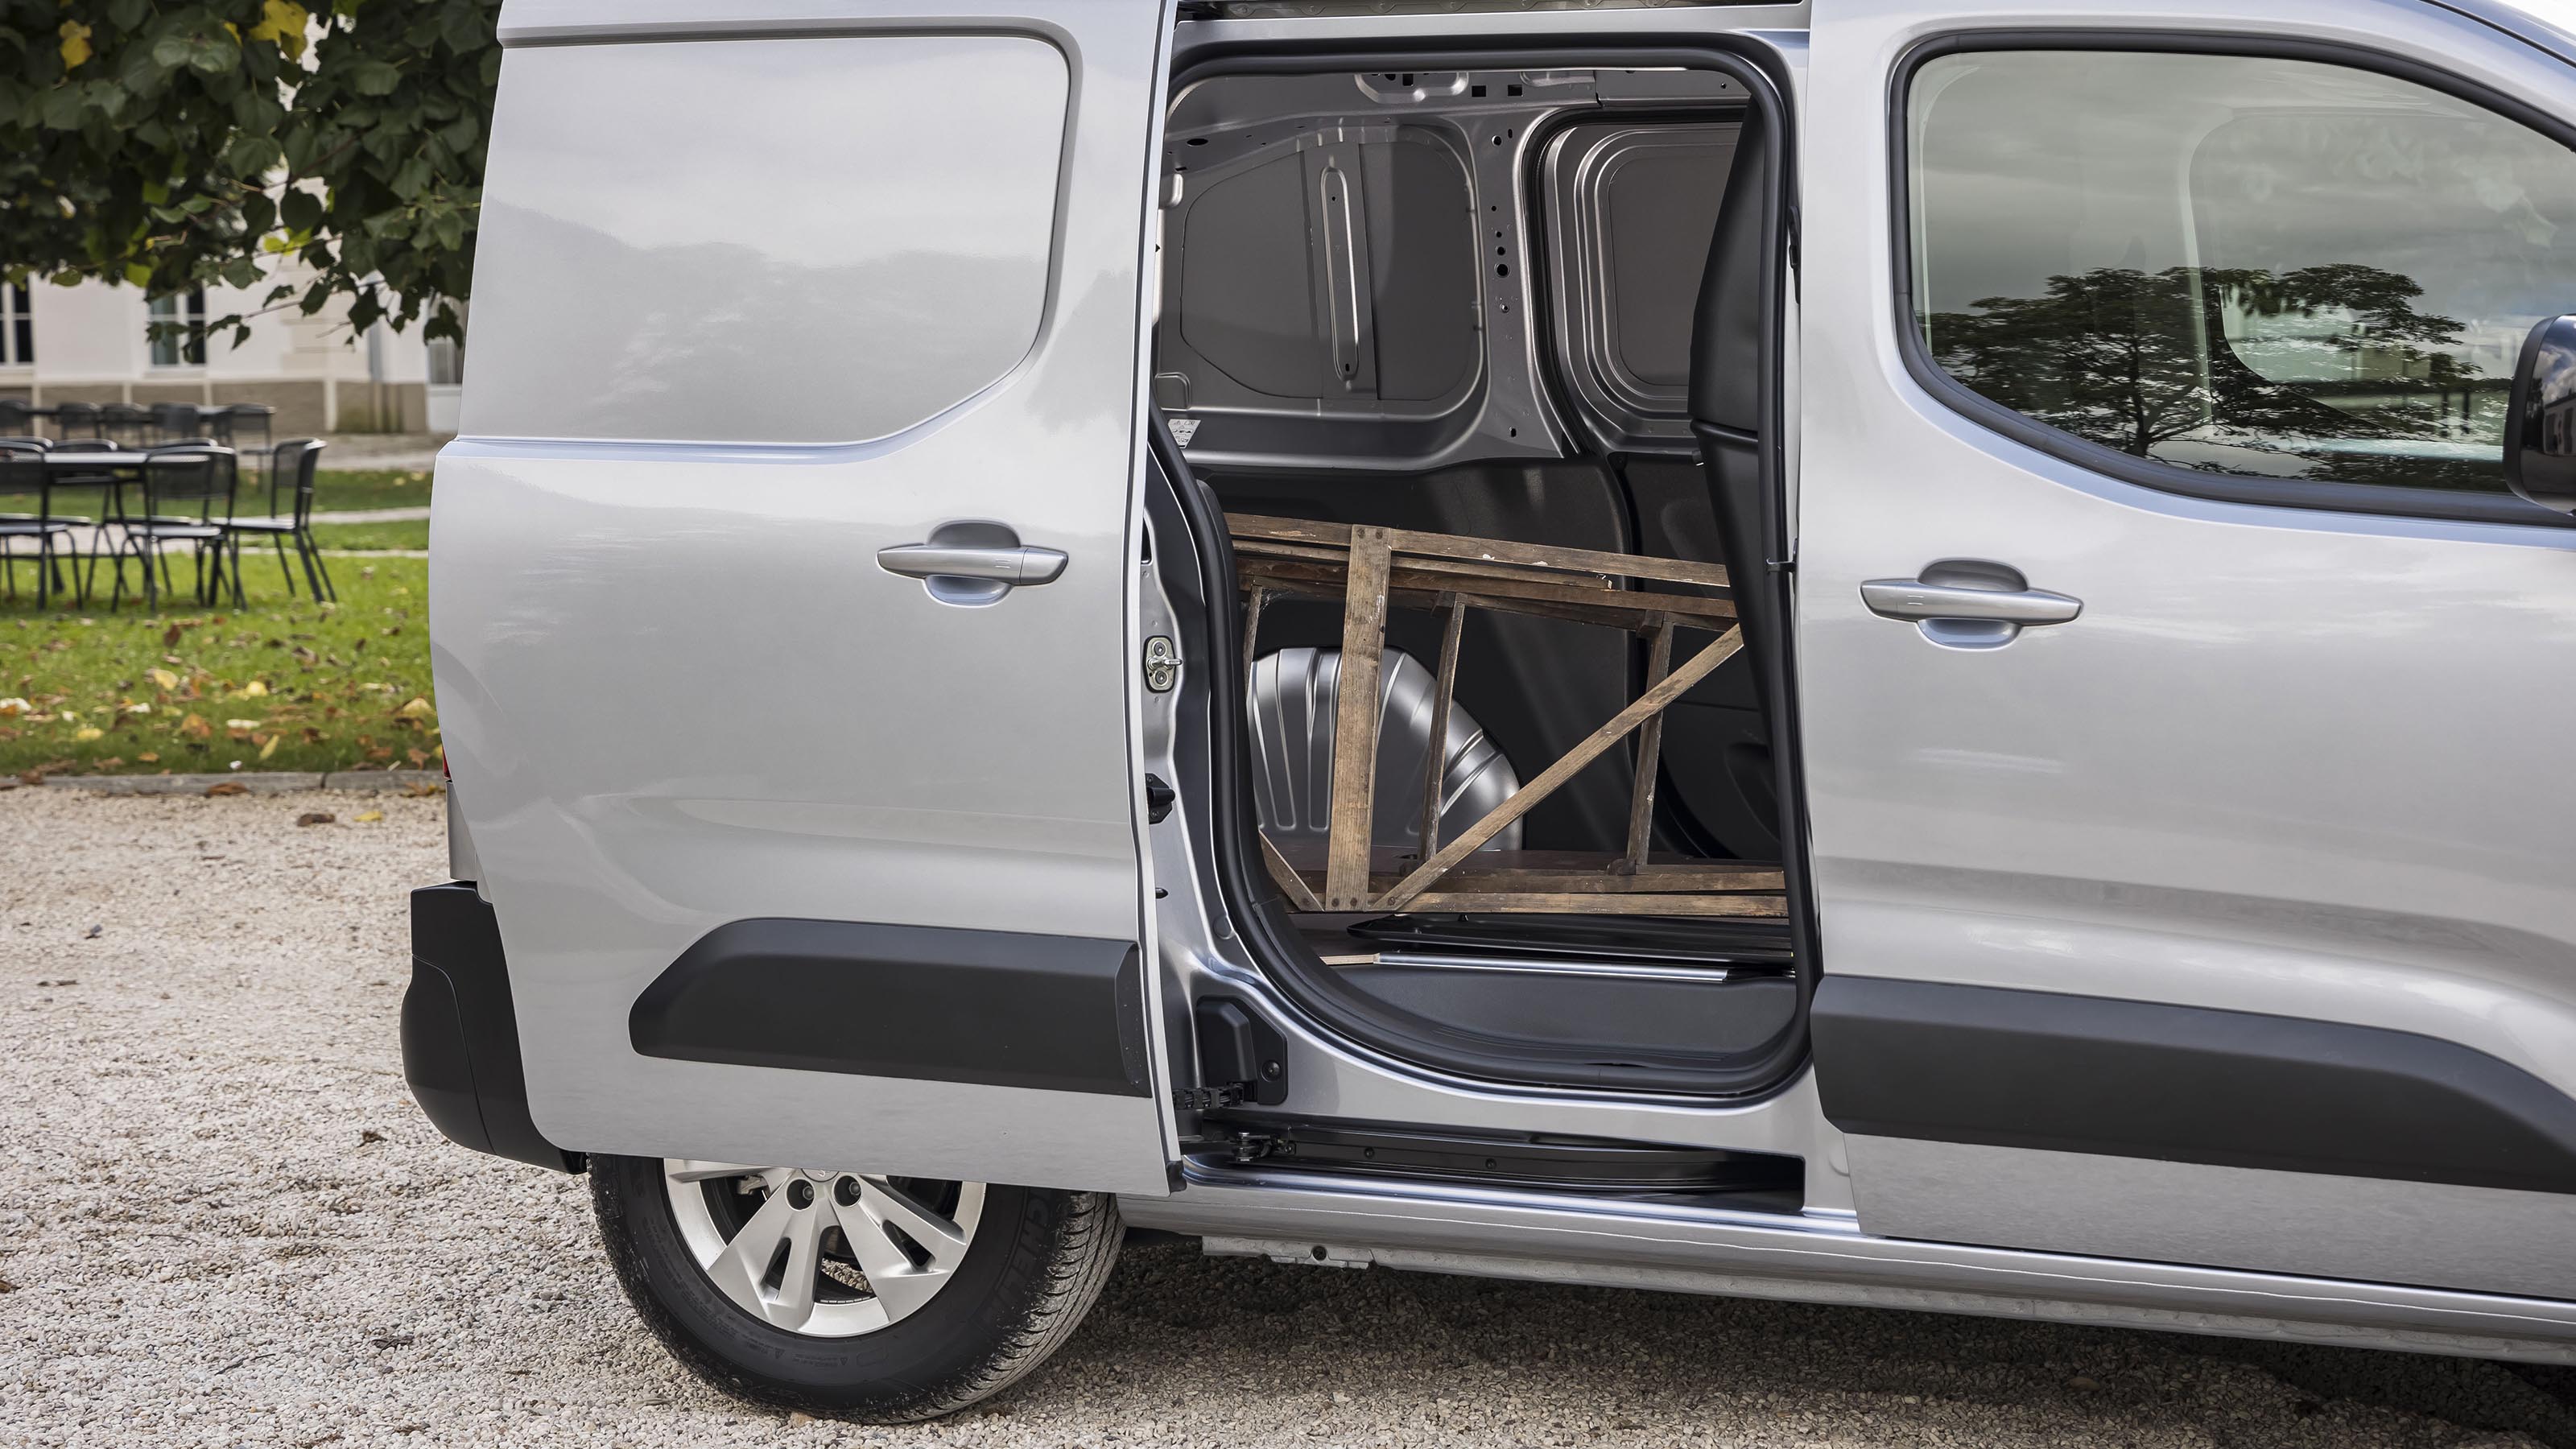 PEUGEOT Partner and e-Partner: compact van for business use